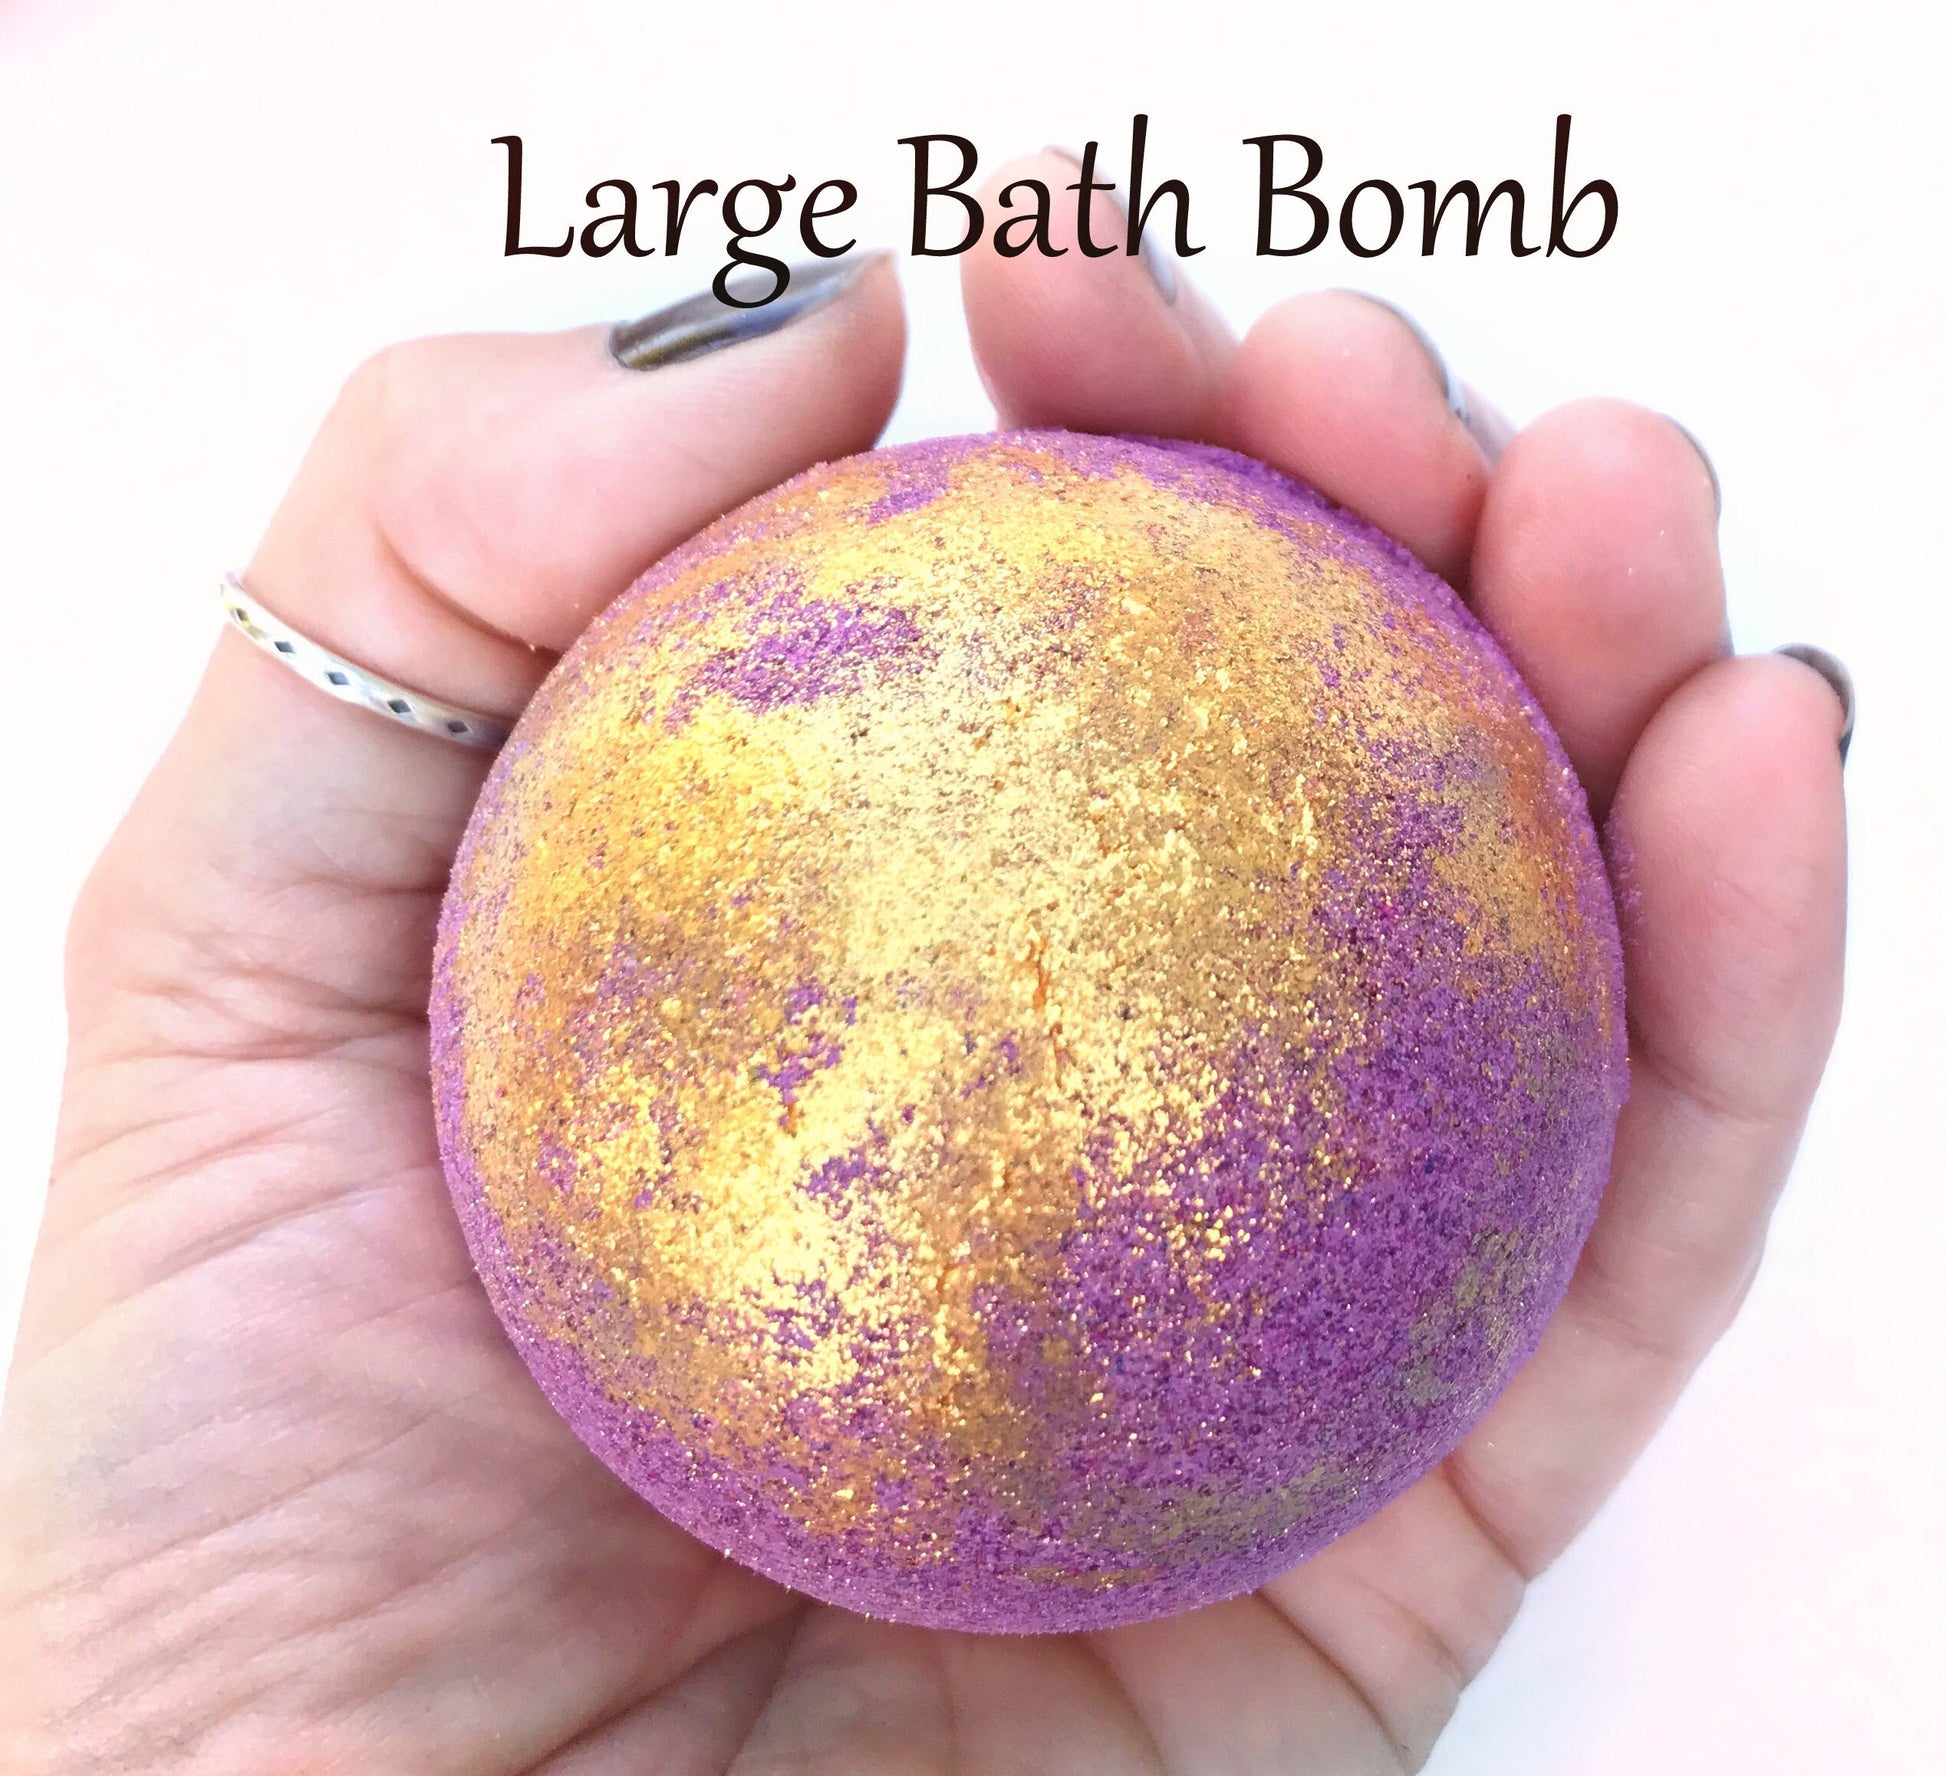 Eclipse bath bomb (purple with gold eco-glitter) held in hand to show size.  "large bath bomb" in writing on photo